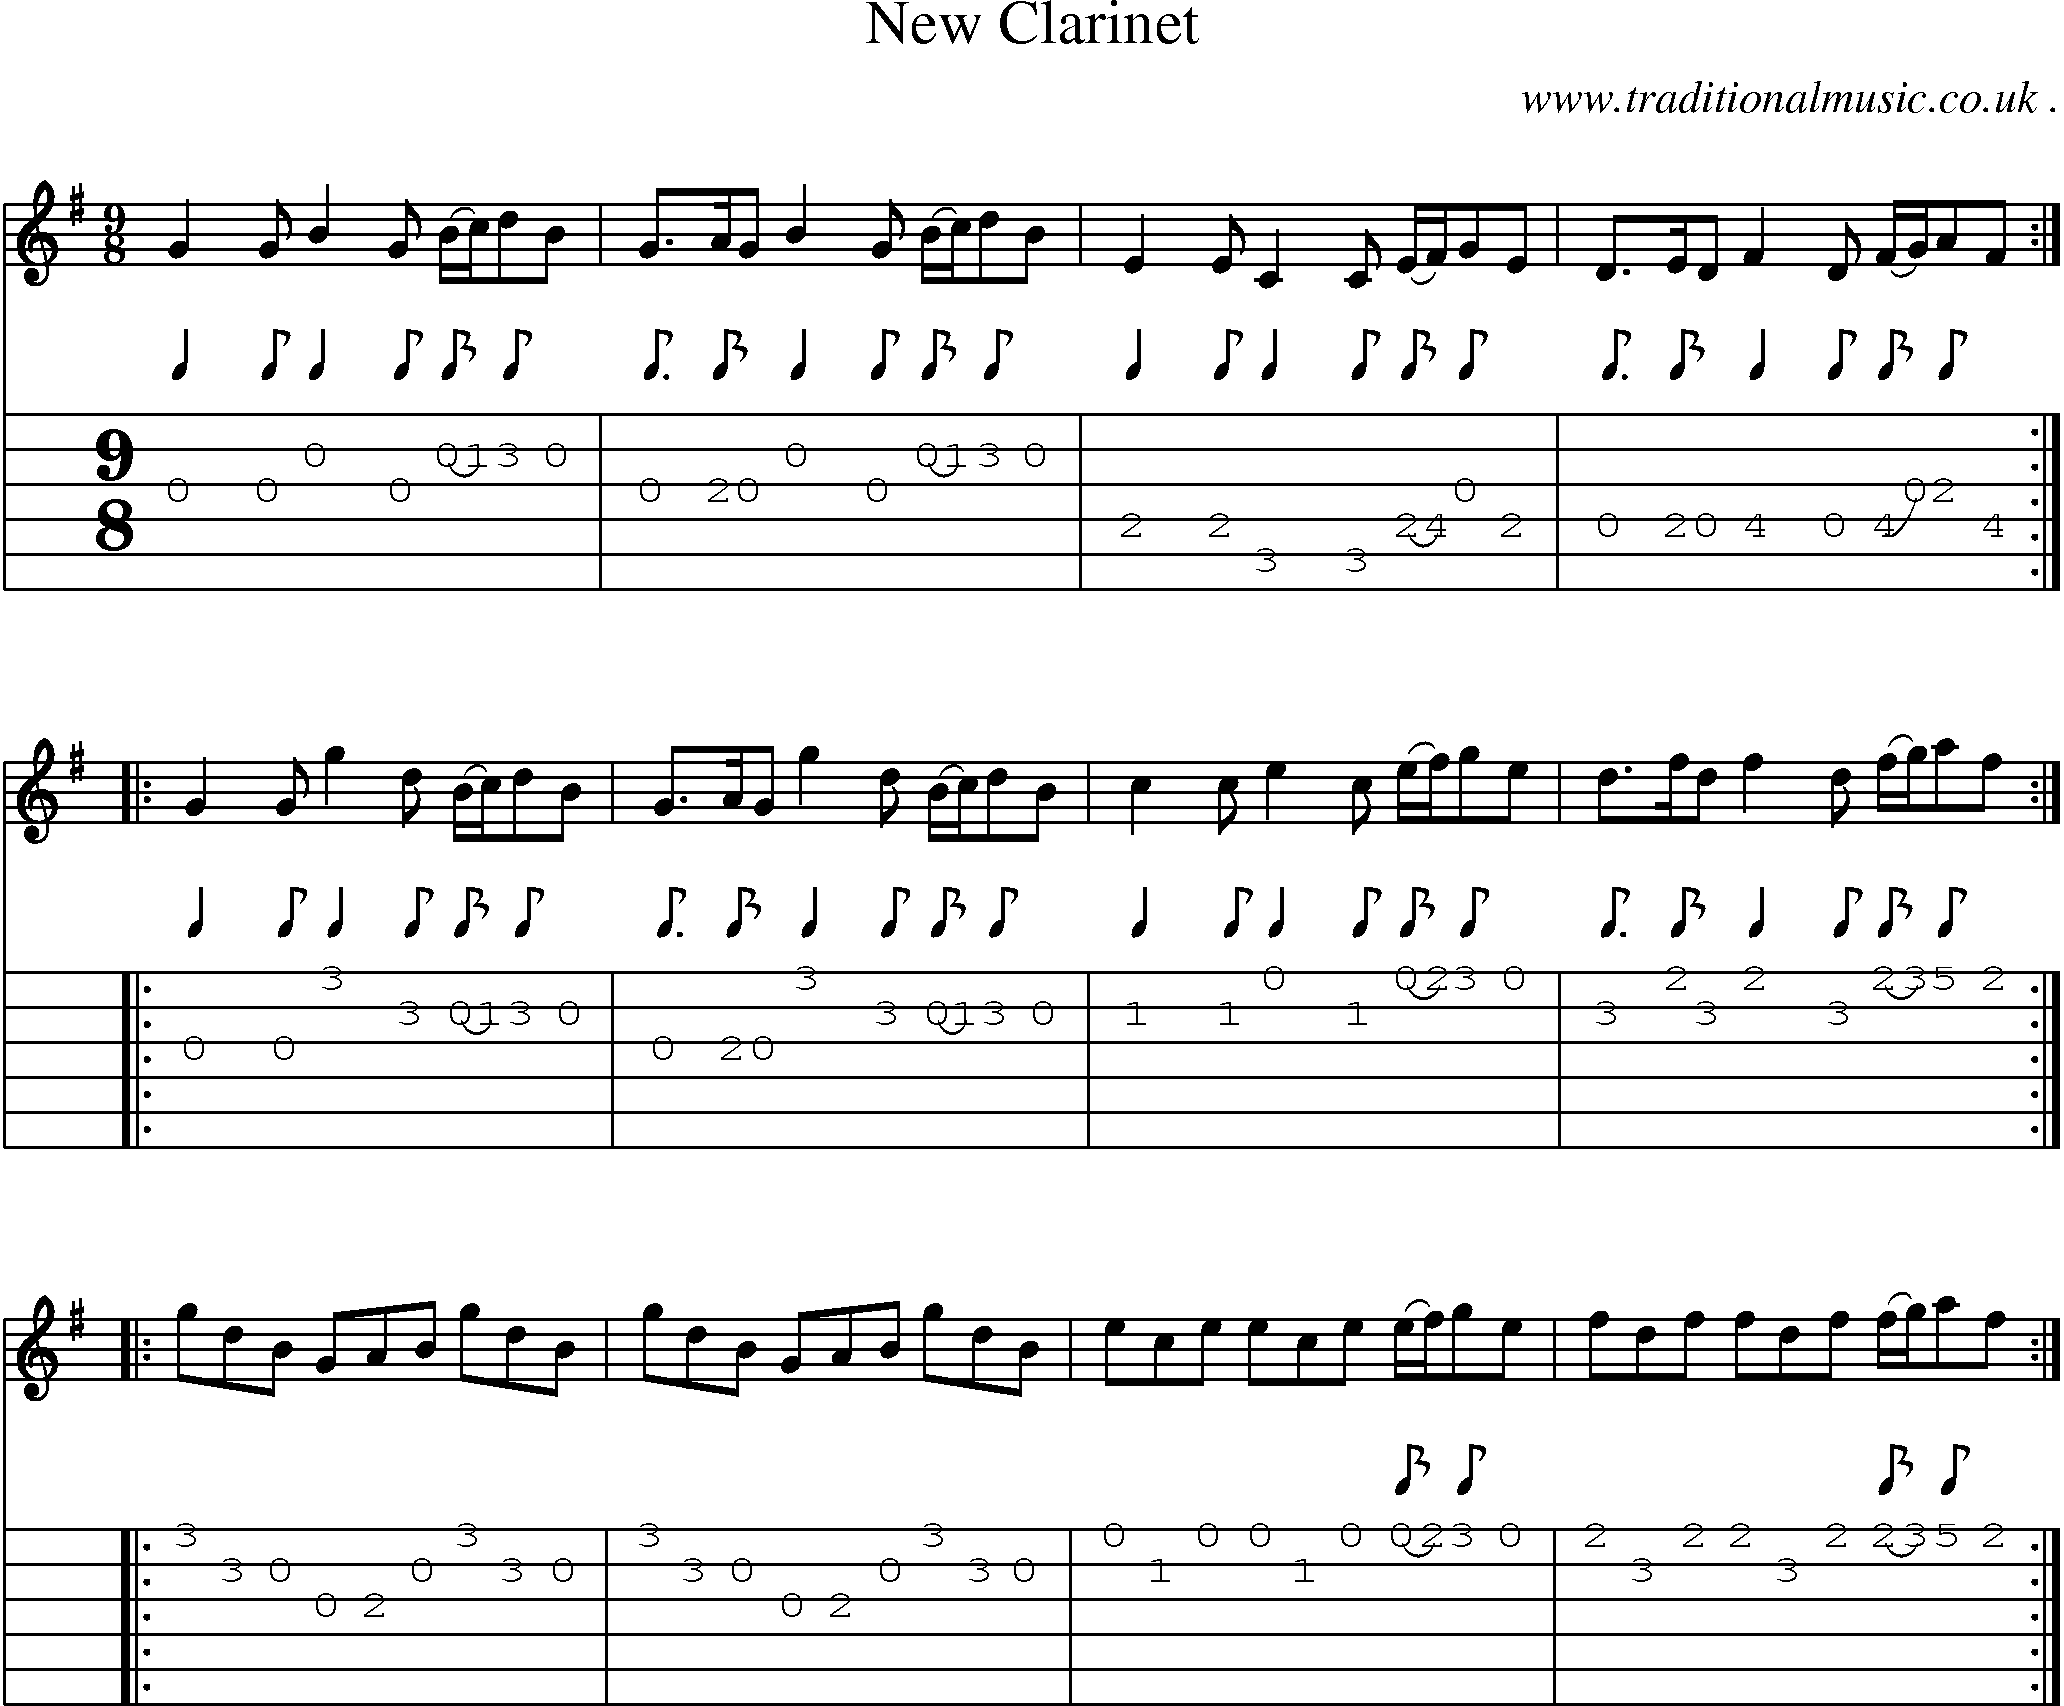 Sheet-music  score, Chords and Guitar Tabs for New Clarinet